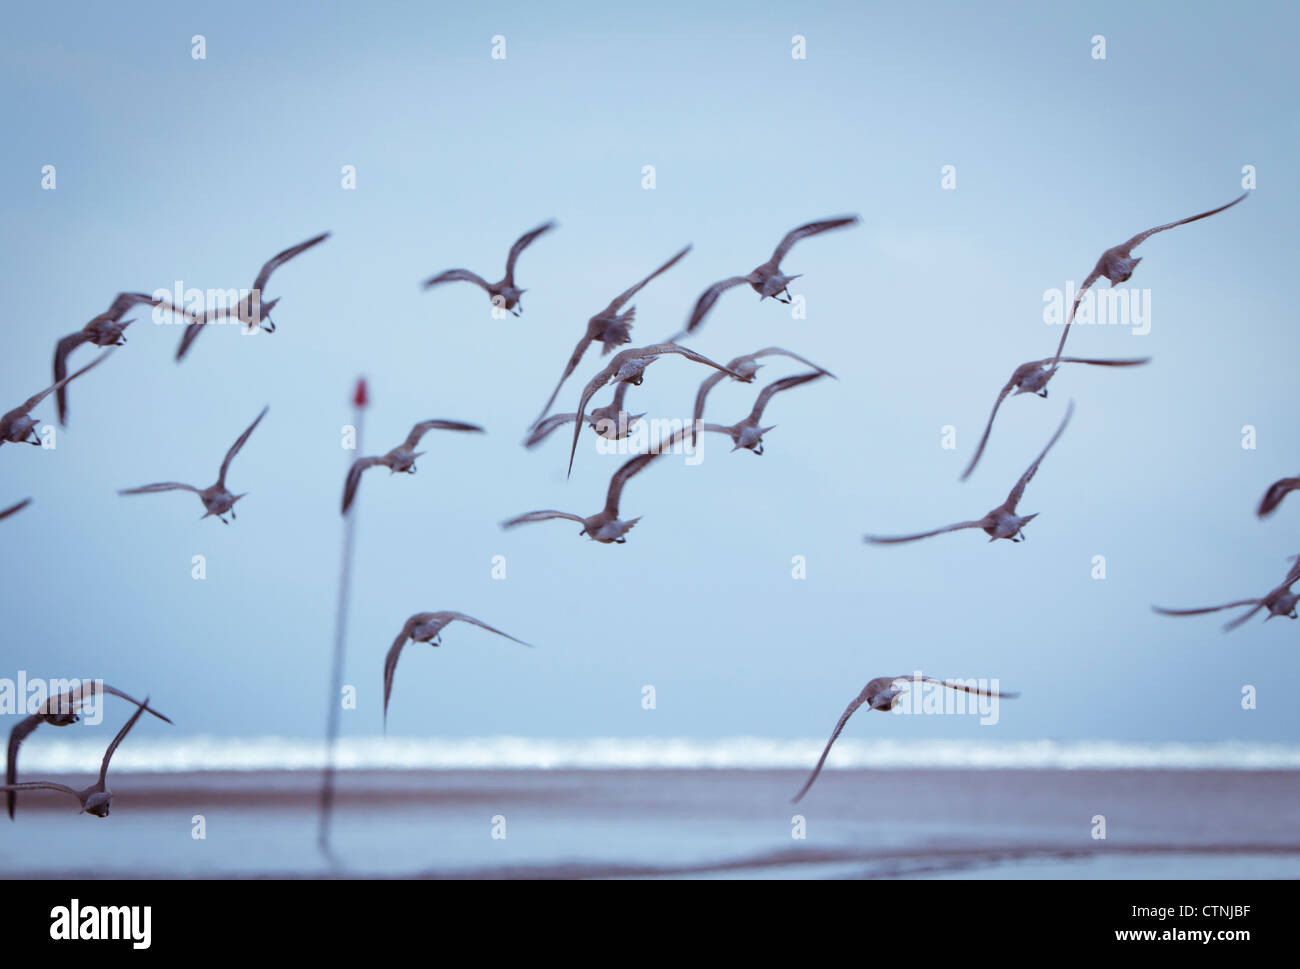 A Flock of birds in flight over a beach with the sea in the background Stock Photo